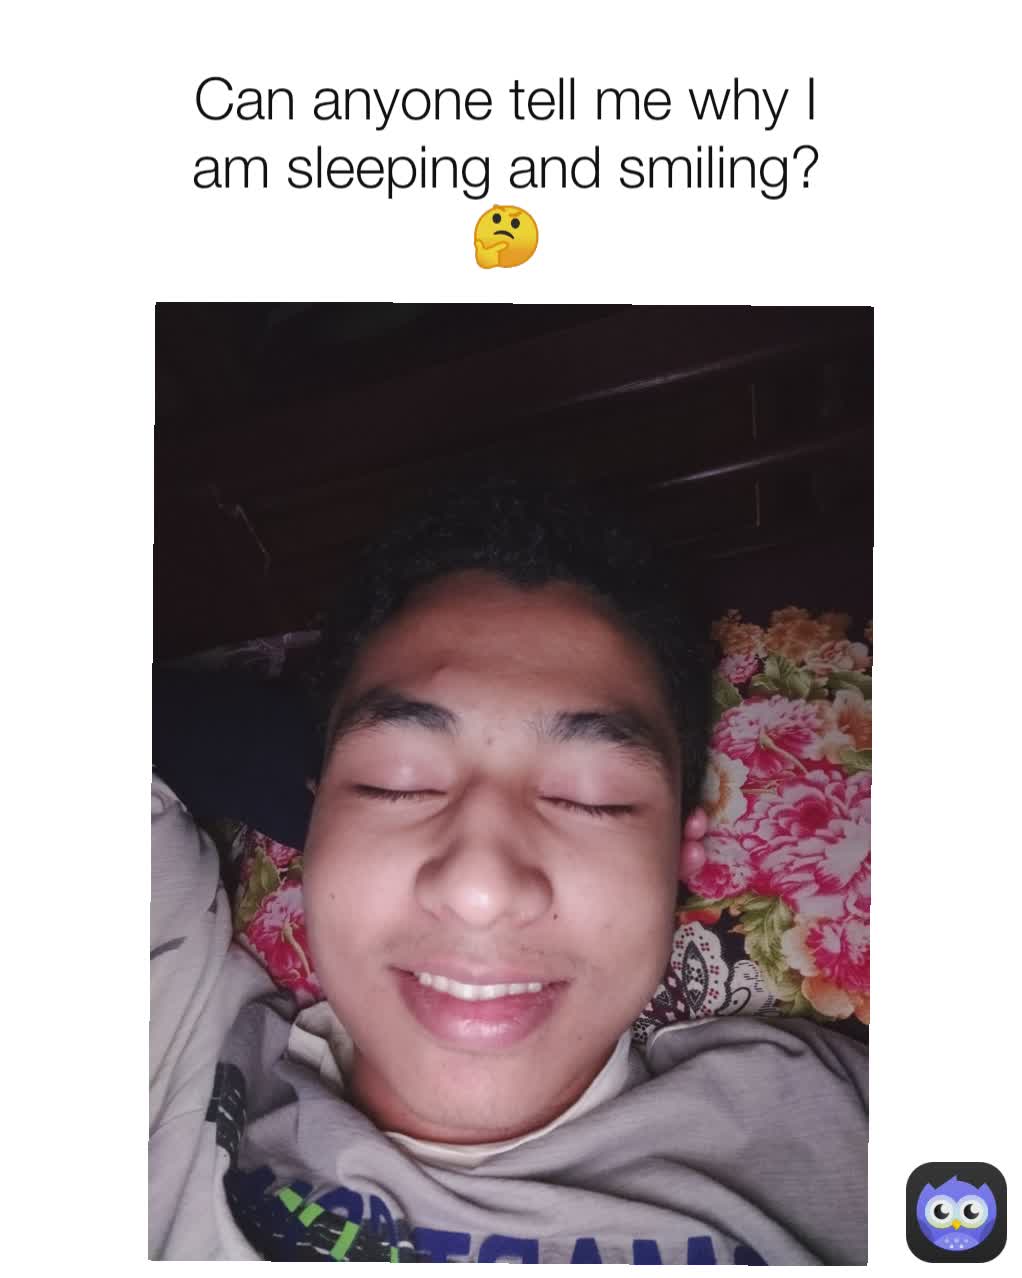 Can anyone tell me why I am sleeping and smiling?
🤔